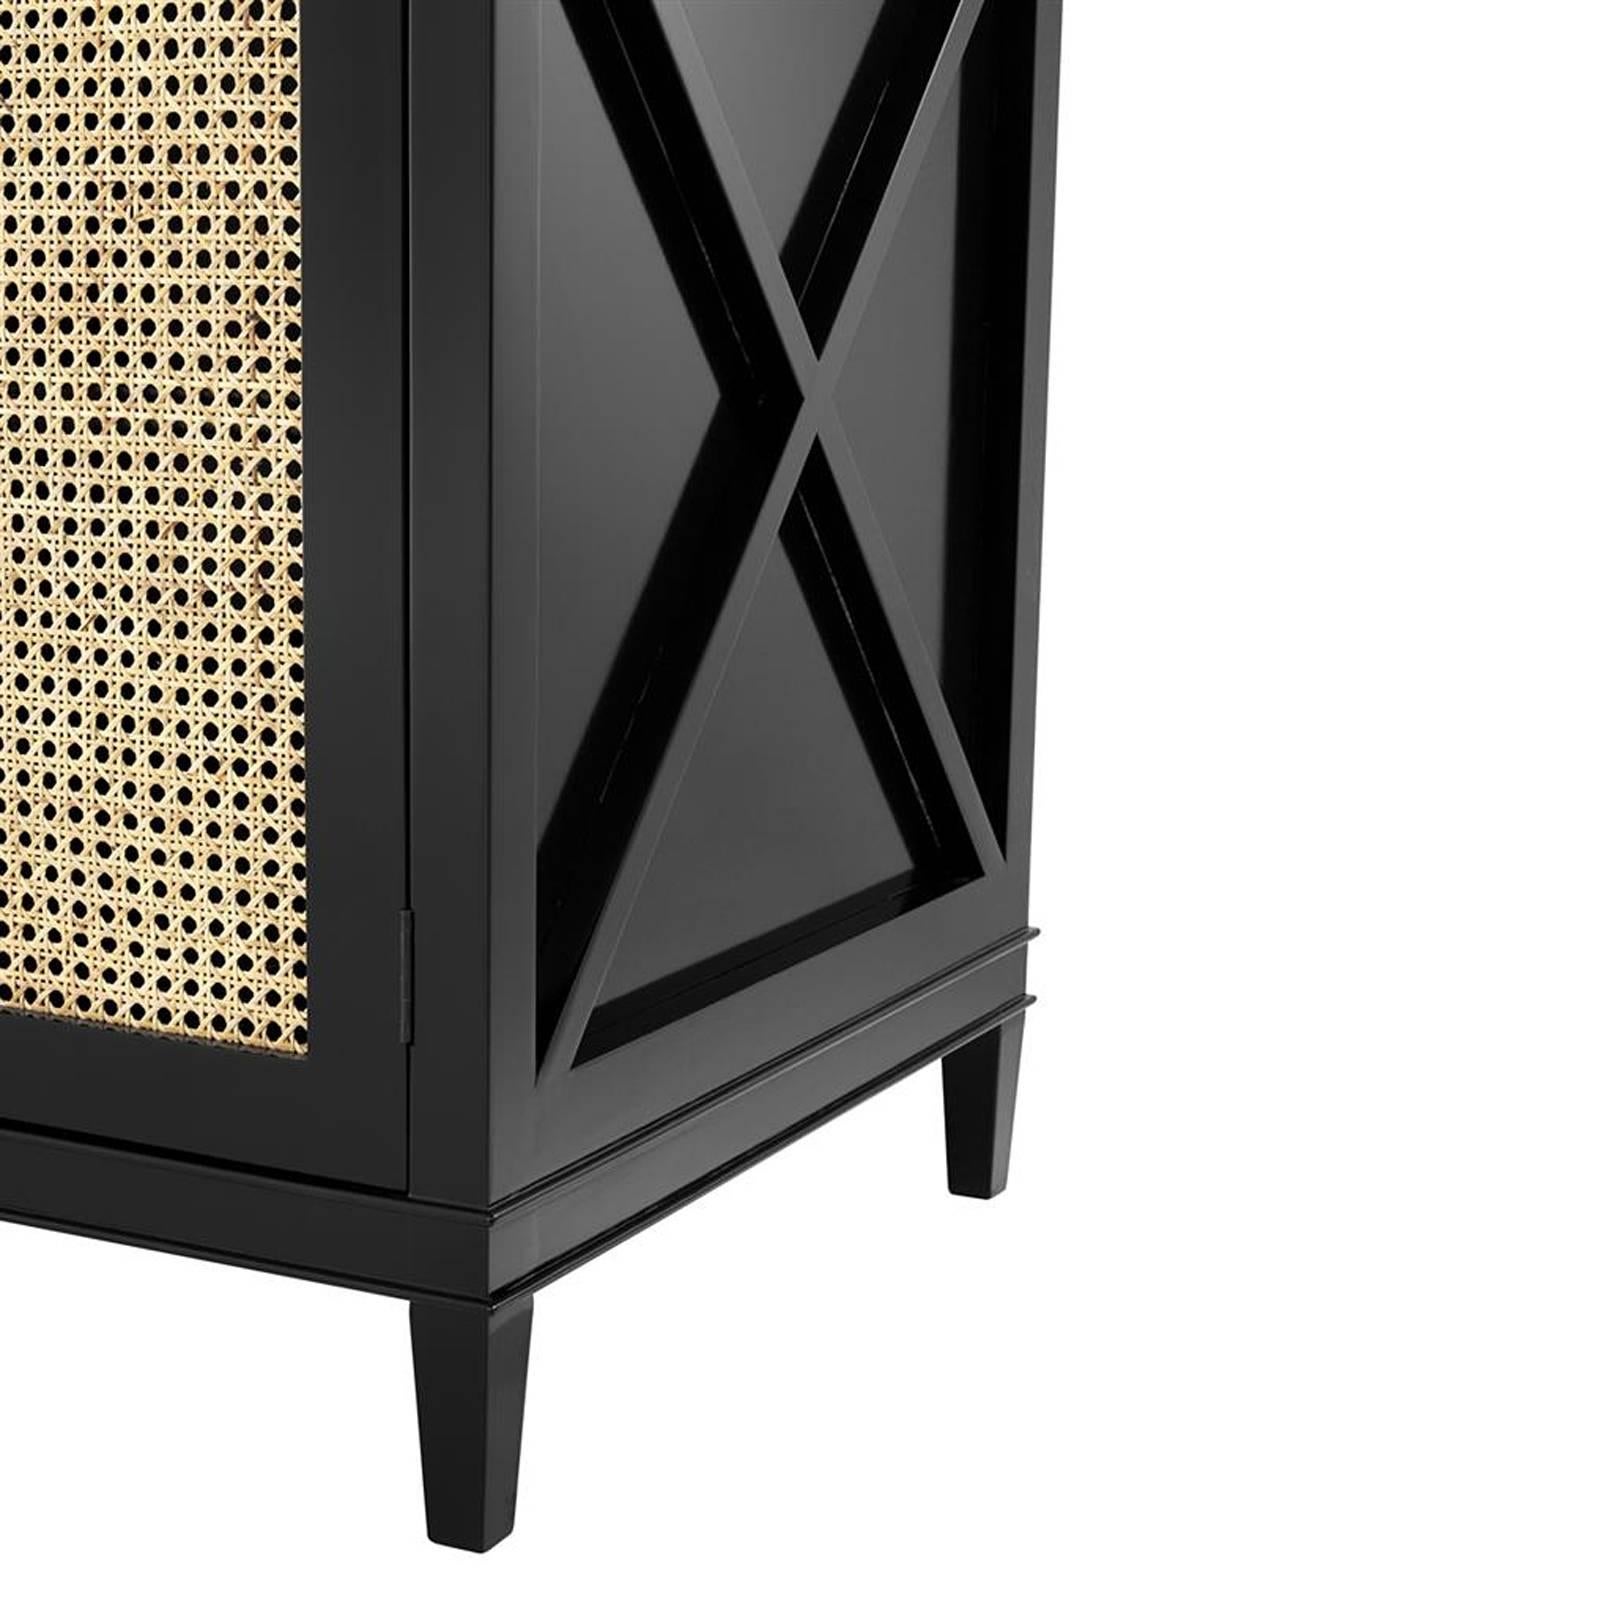 Bronze Evora Sideboard in Black Lacquered Solid Mahogany Wood